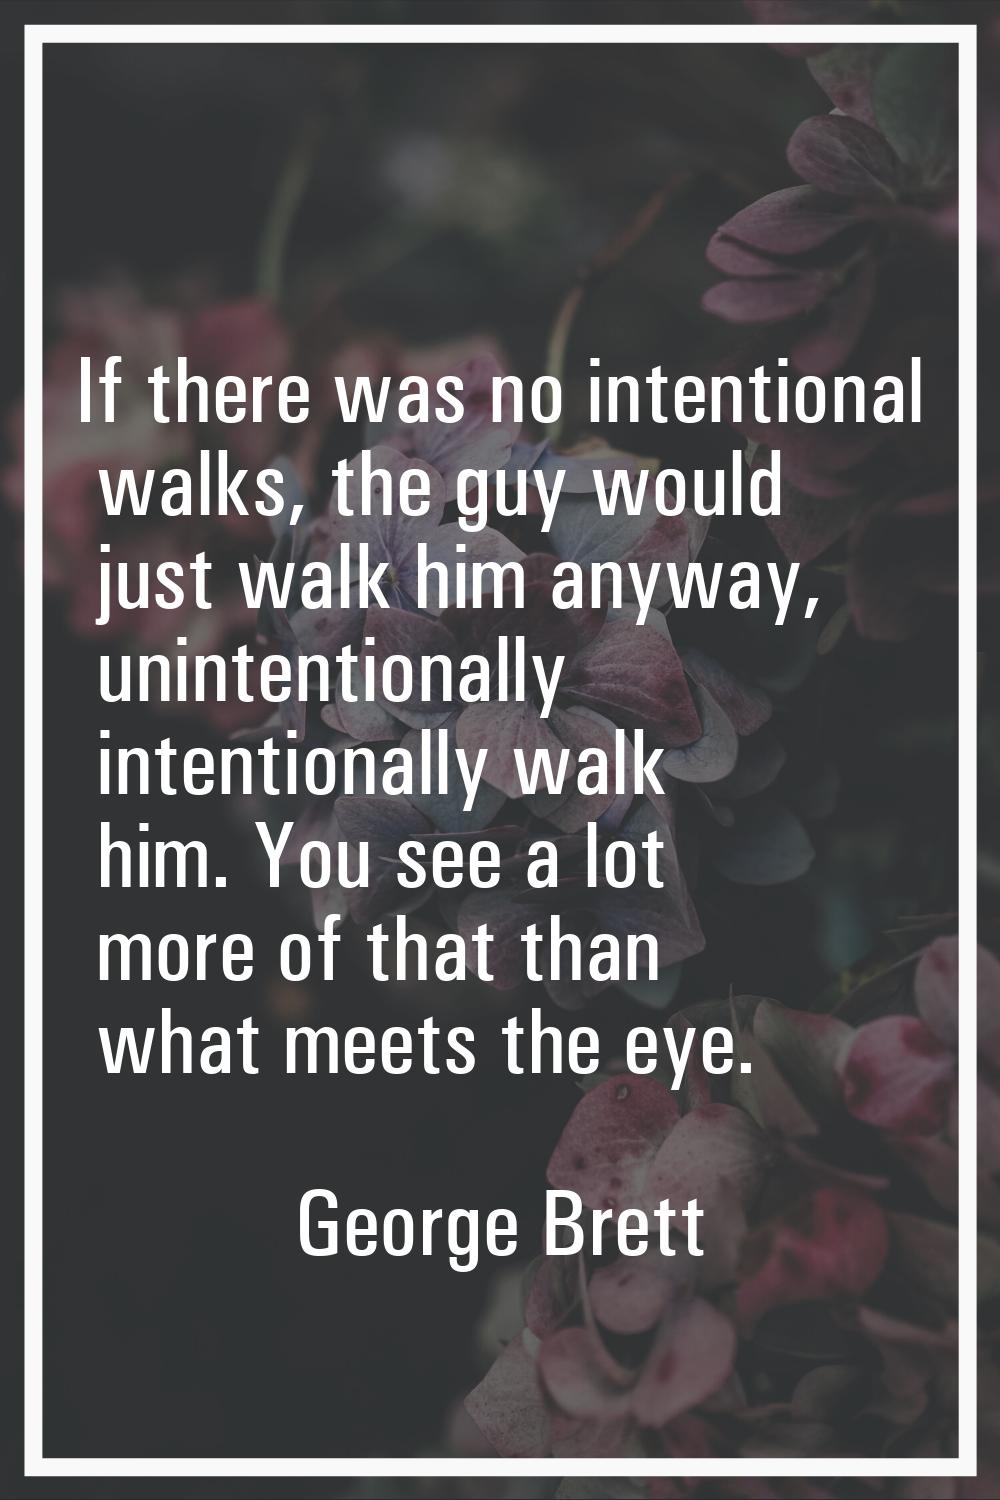 If there was no intentional walks, the guy would just walk him anyway, unintentionally intentionall